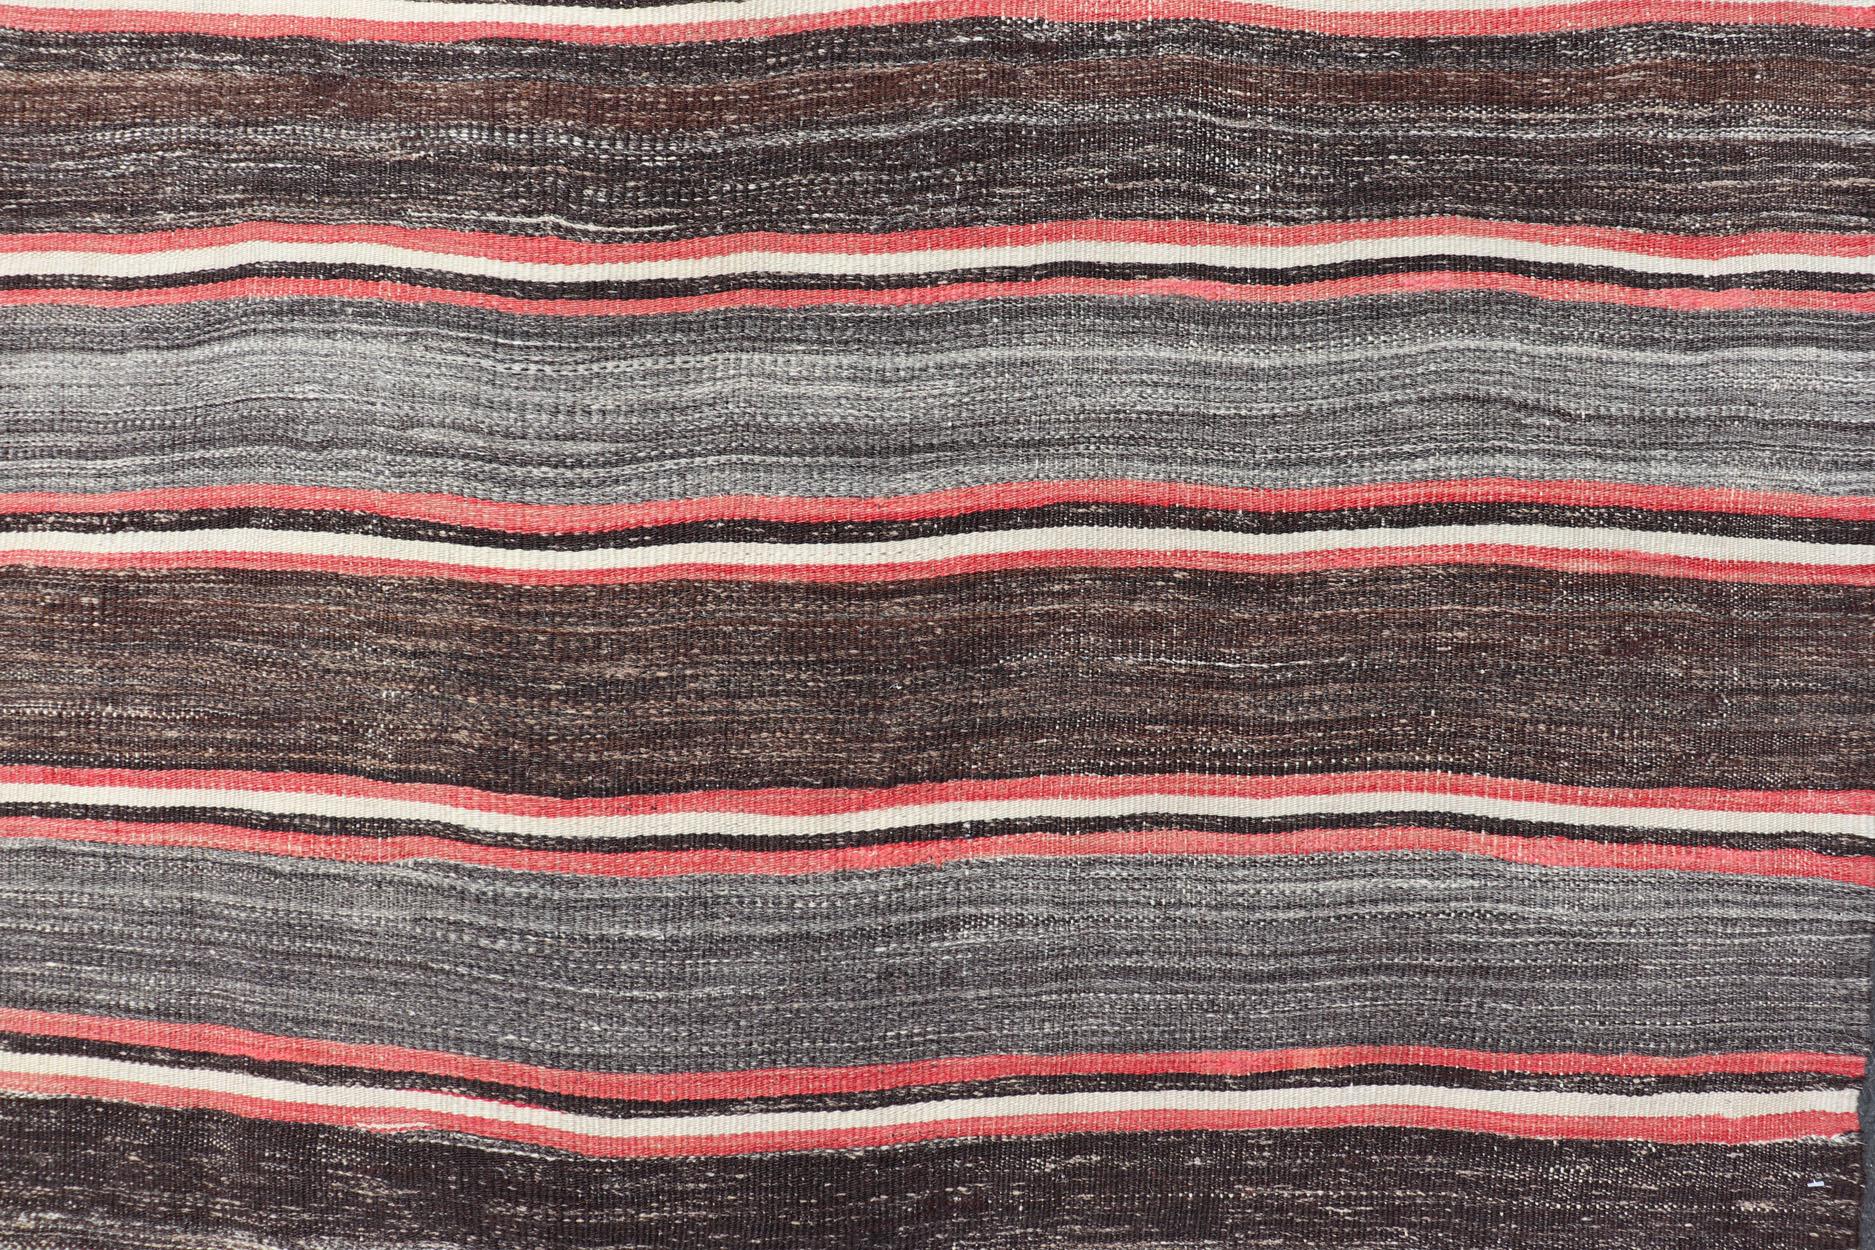 Vintage Turkish Kilim Wide Runner in Gray, Coral, Brown & Charcoal with Stripes 6